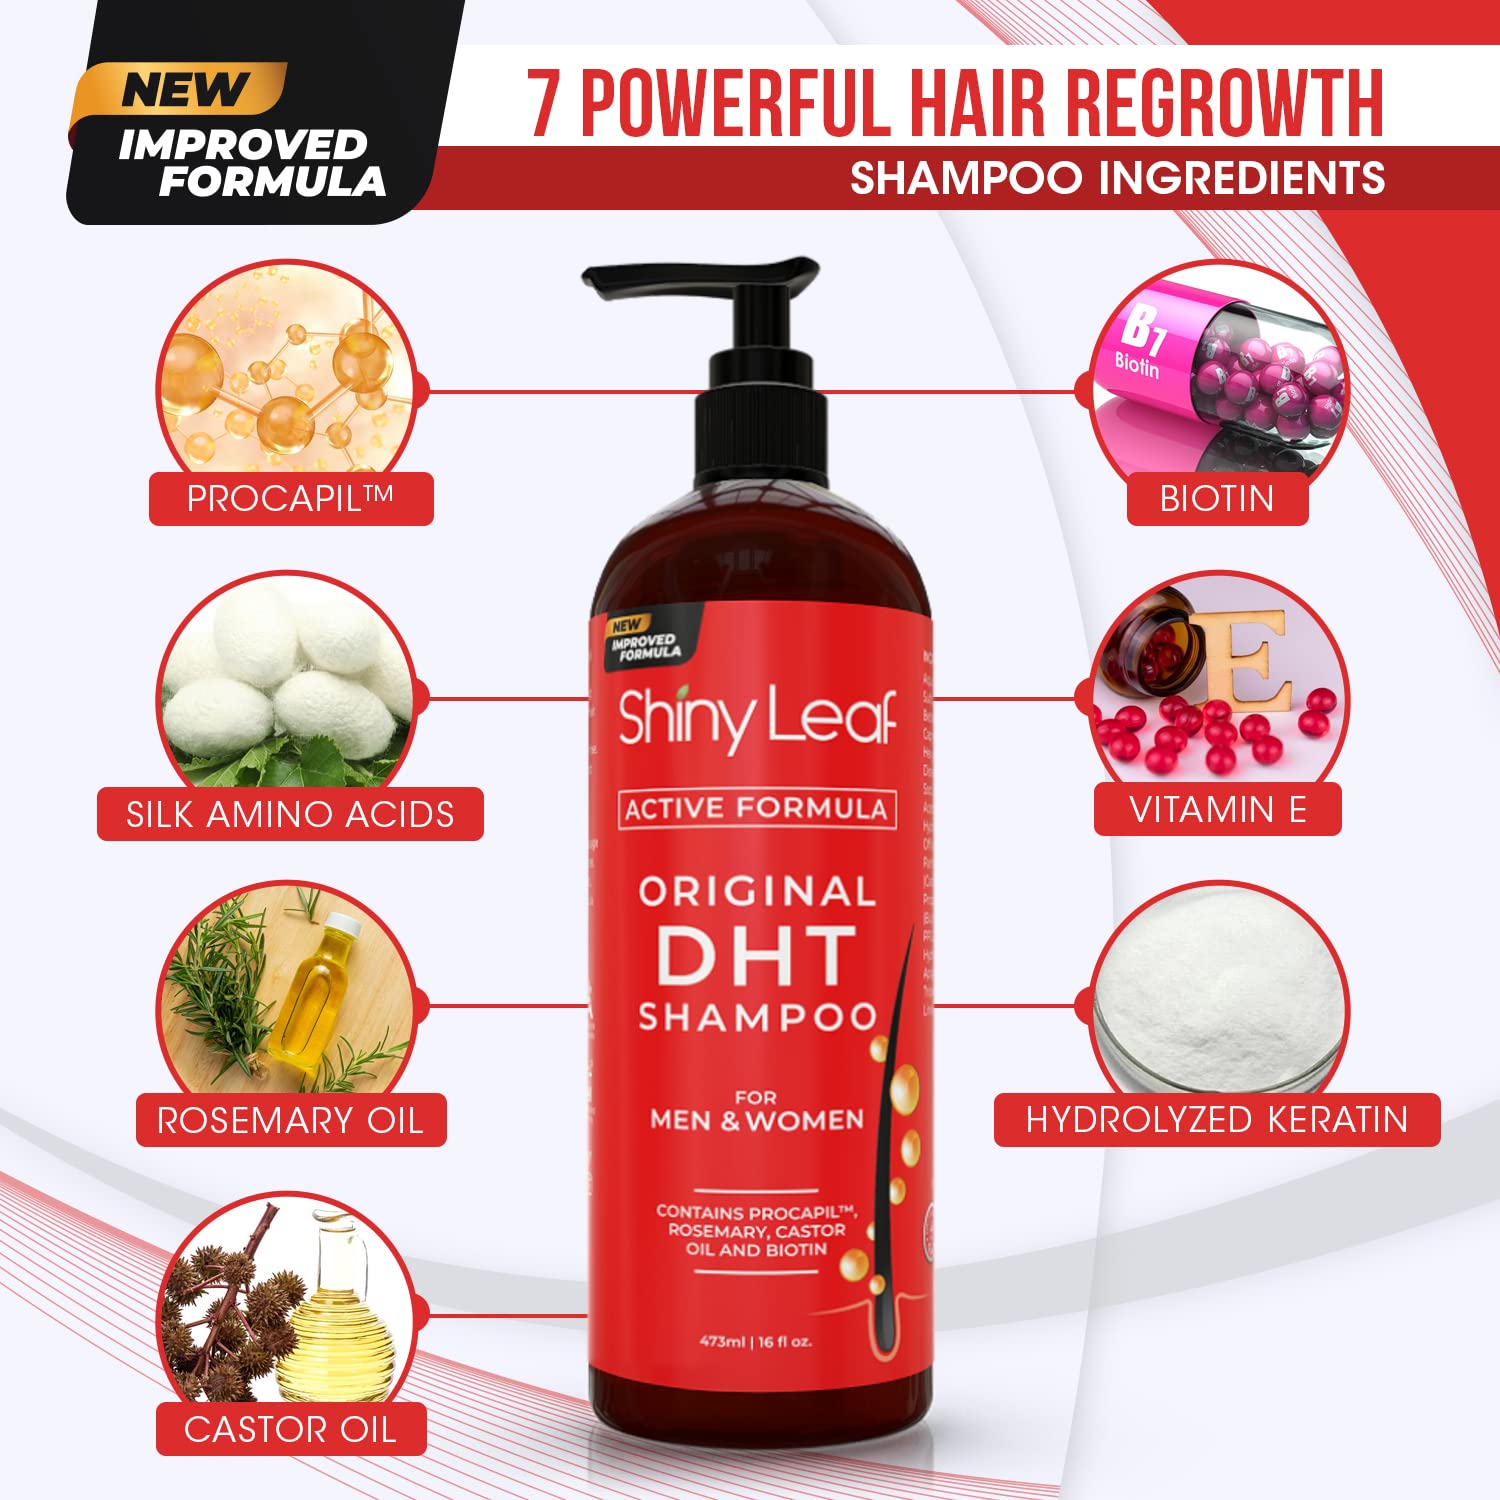 DHT Blocker Shampoo and Conditioner for Hair Loss With Biotin For Men, Women, Anti-Hair Loss Treatment, Rosemary Leaf Oil and Asparagus Extracts, for Thinning Hair (Shampoo and Conditioner)